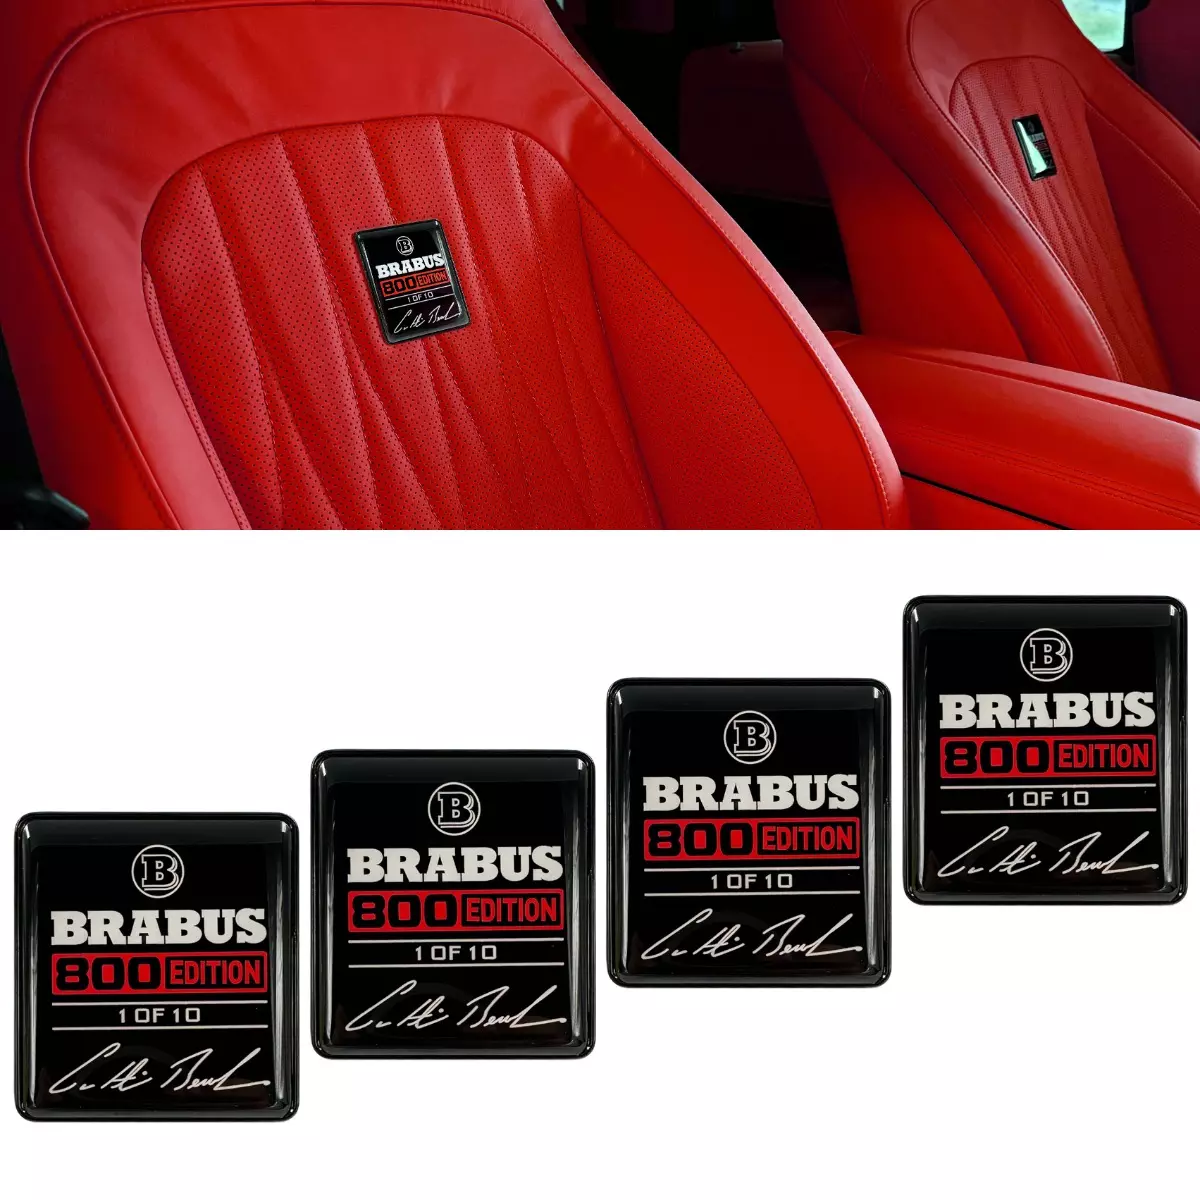 Brabus 800 Edition 1 of 10 Red Seat Emblems Set for Mercedes-Benz W463A